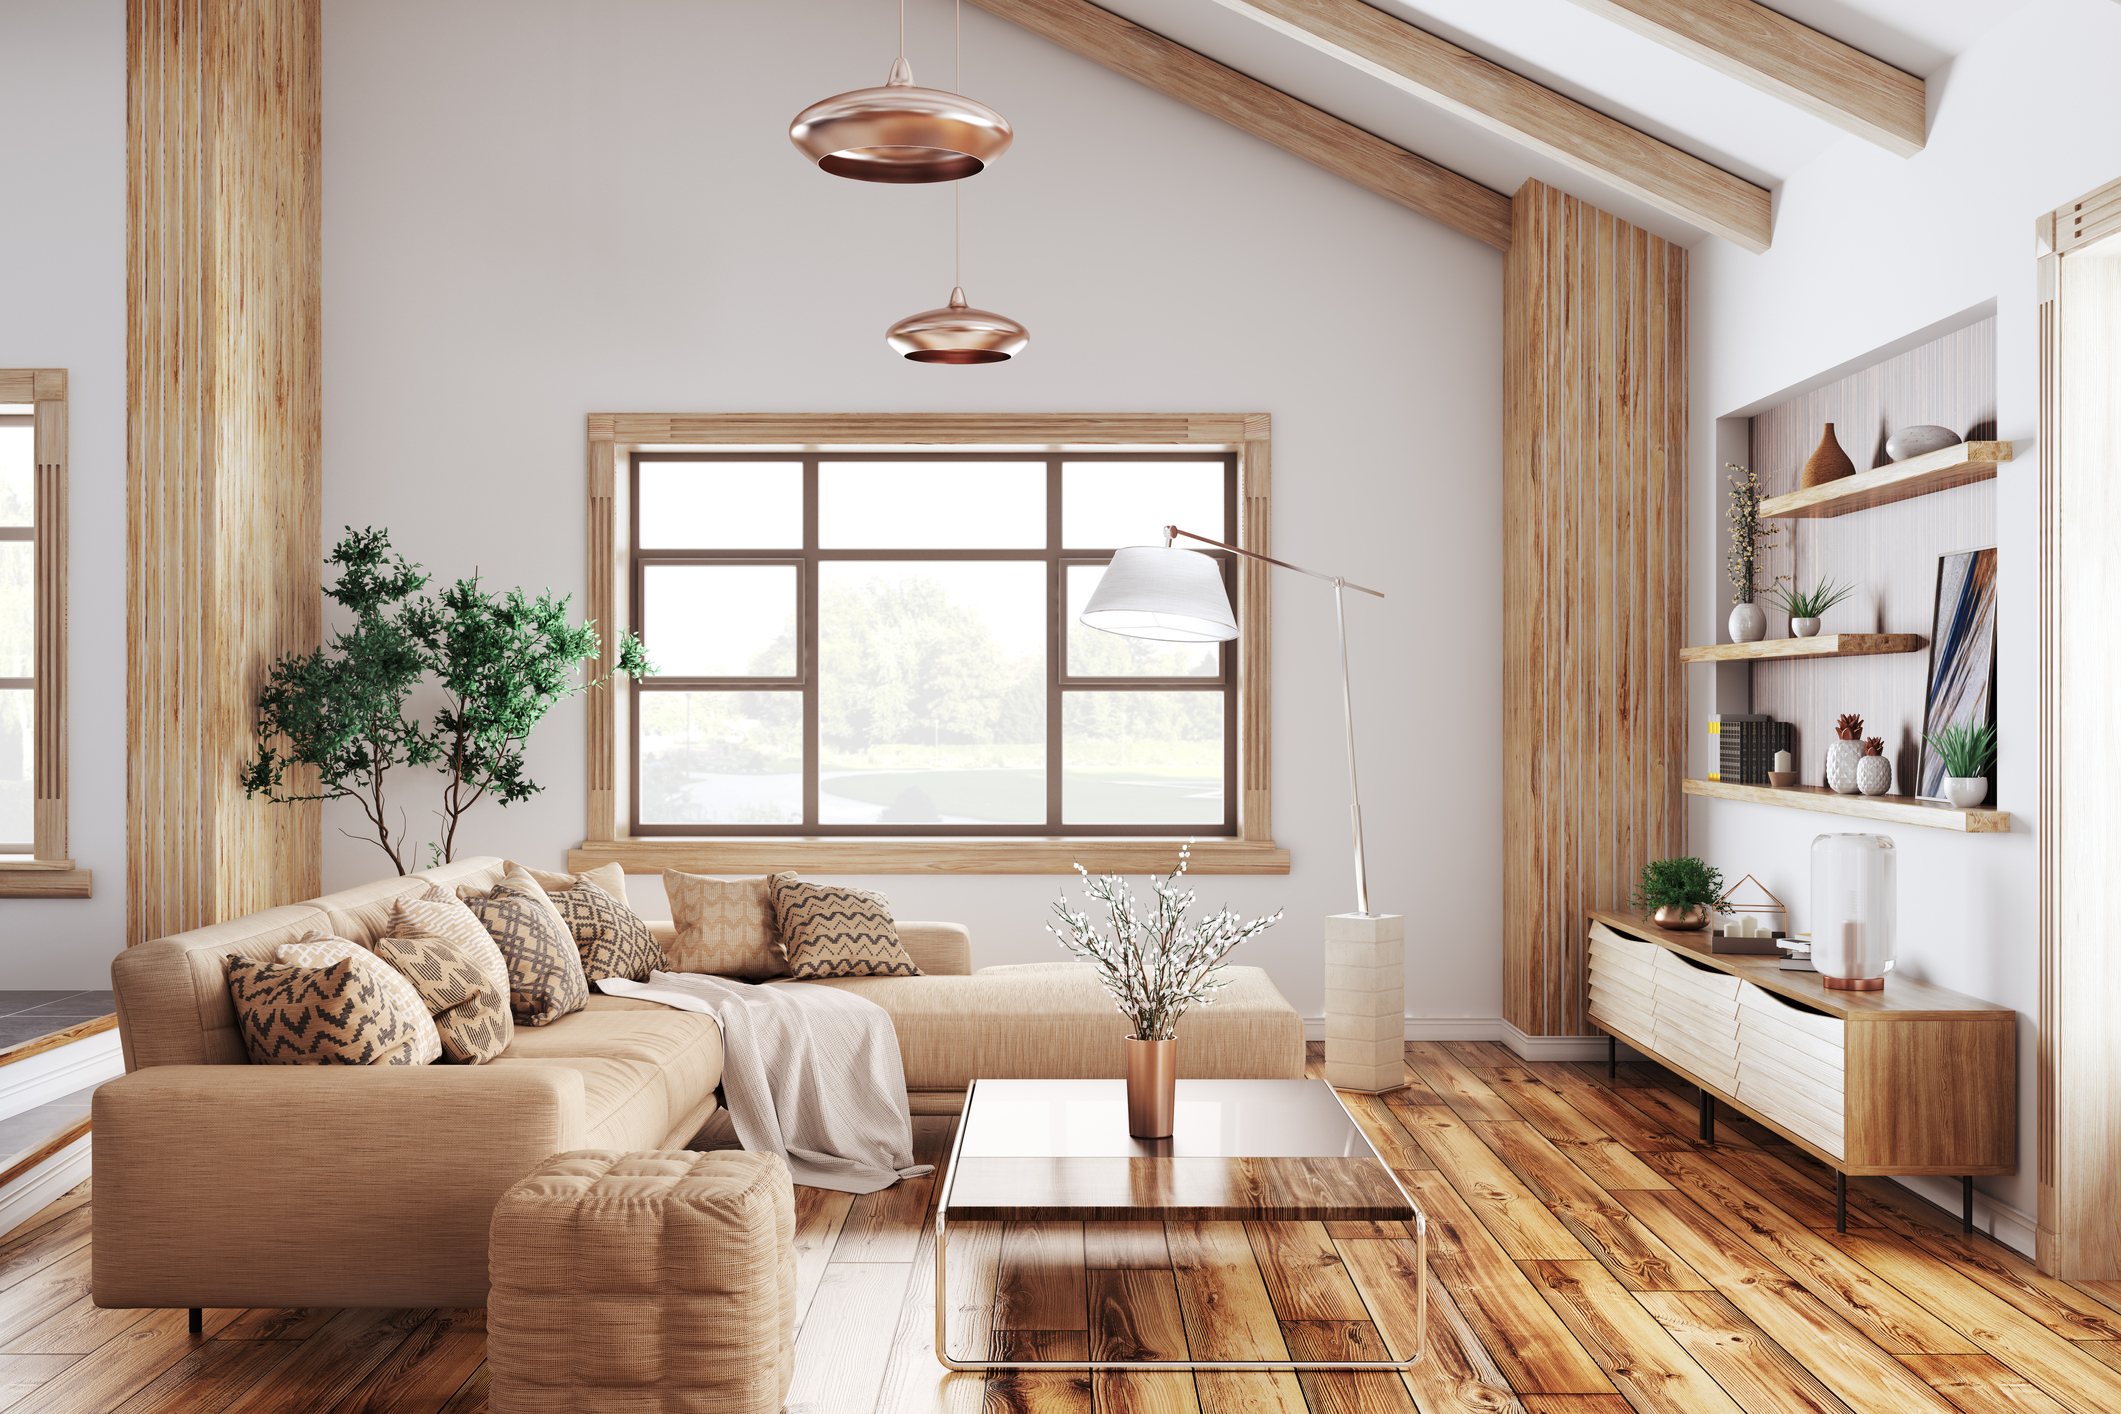 A living room with hardwood floors and various wood accents.